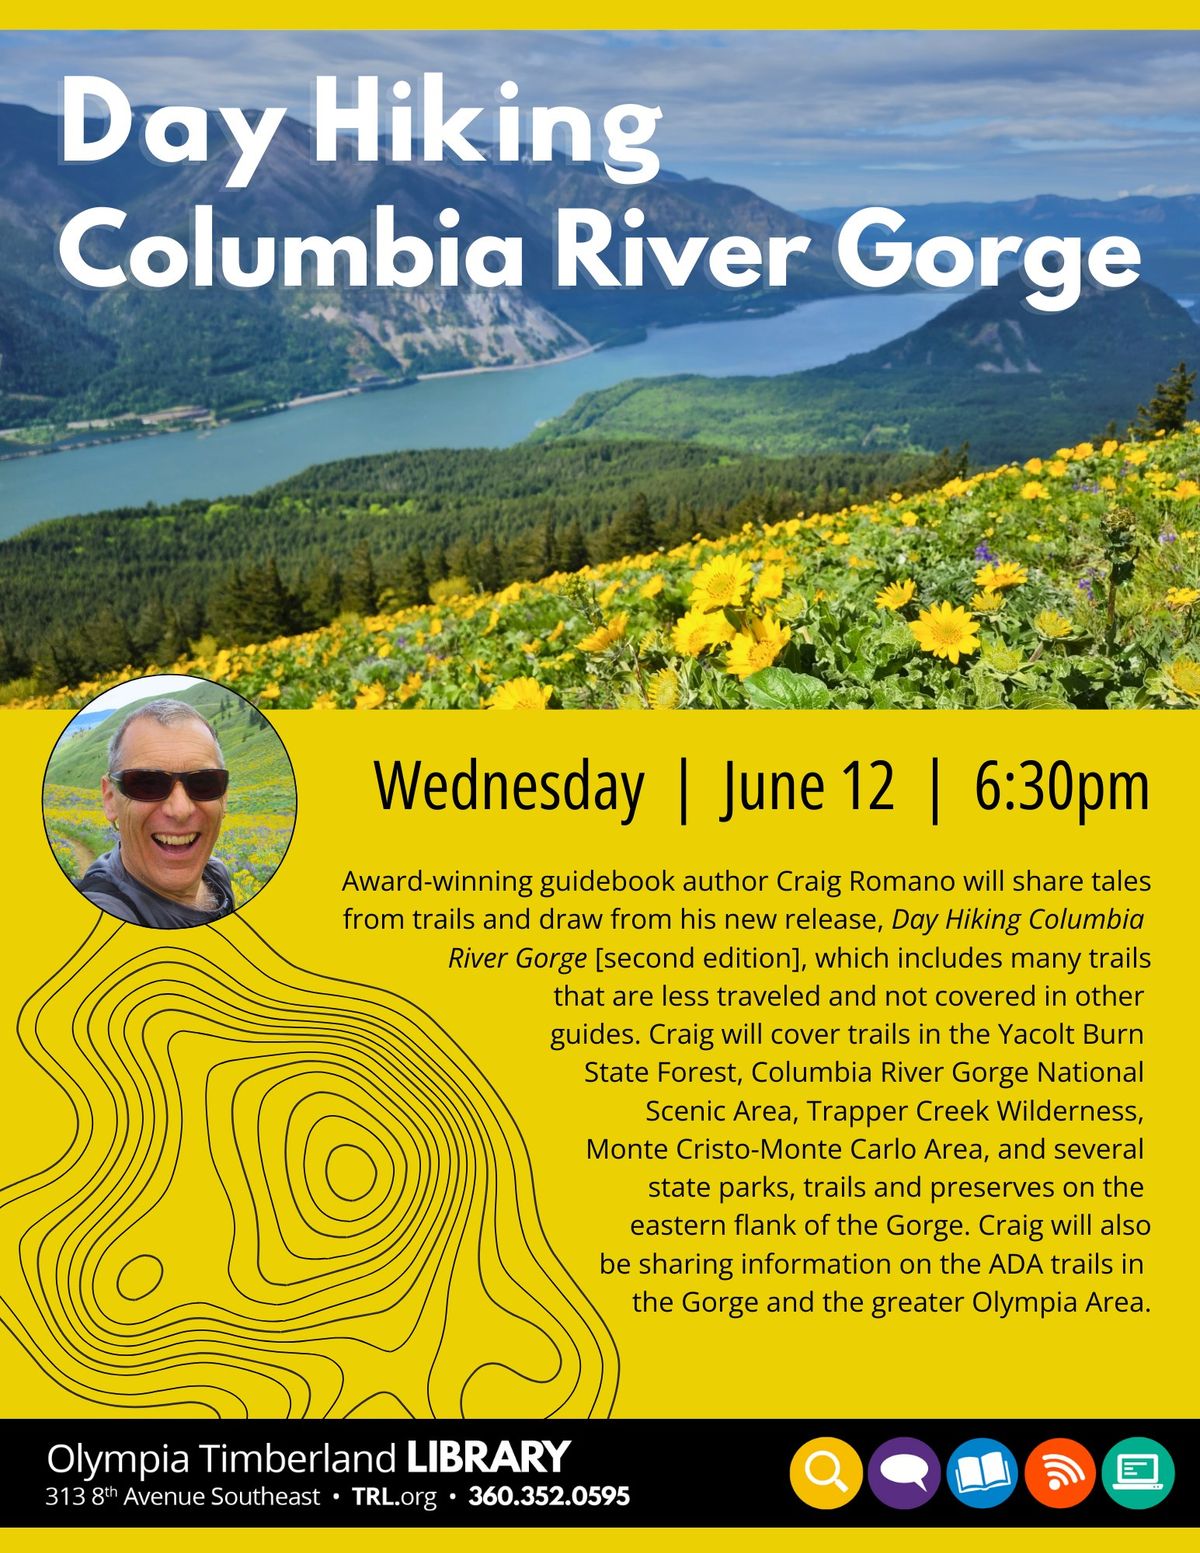 Day Hiking Columbia River Gorge (including ADA trails in the Gorge and Olympia area)